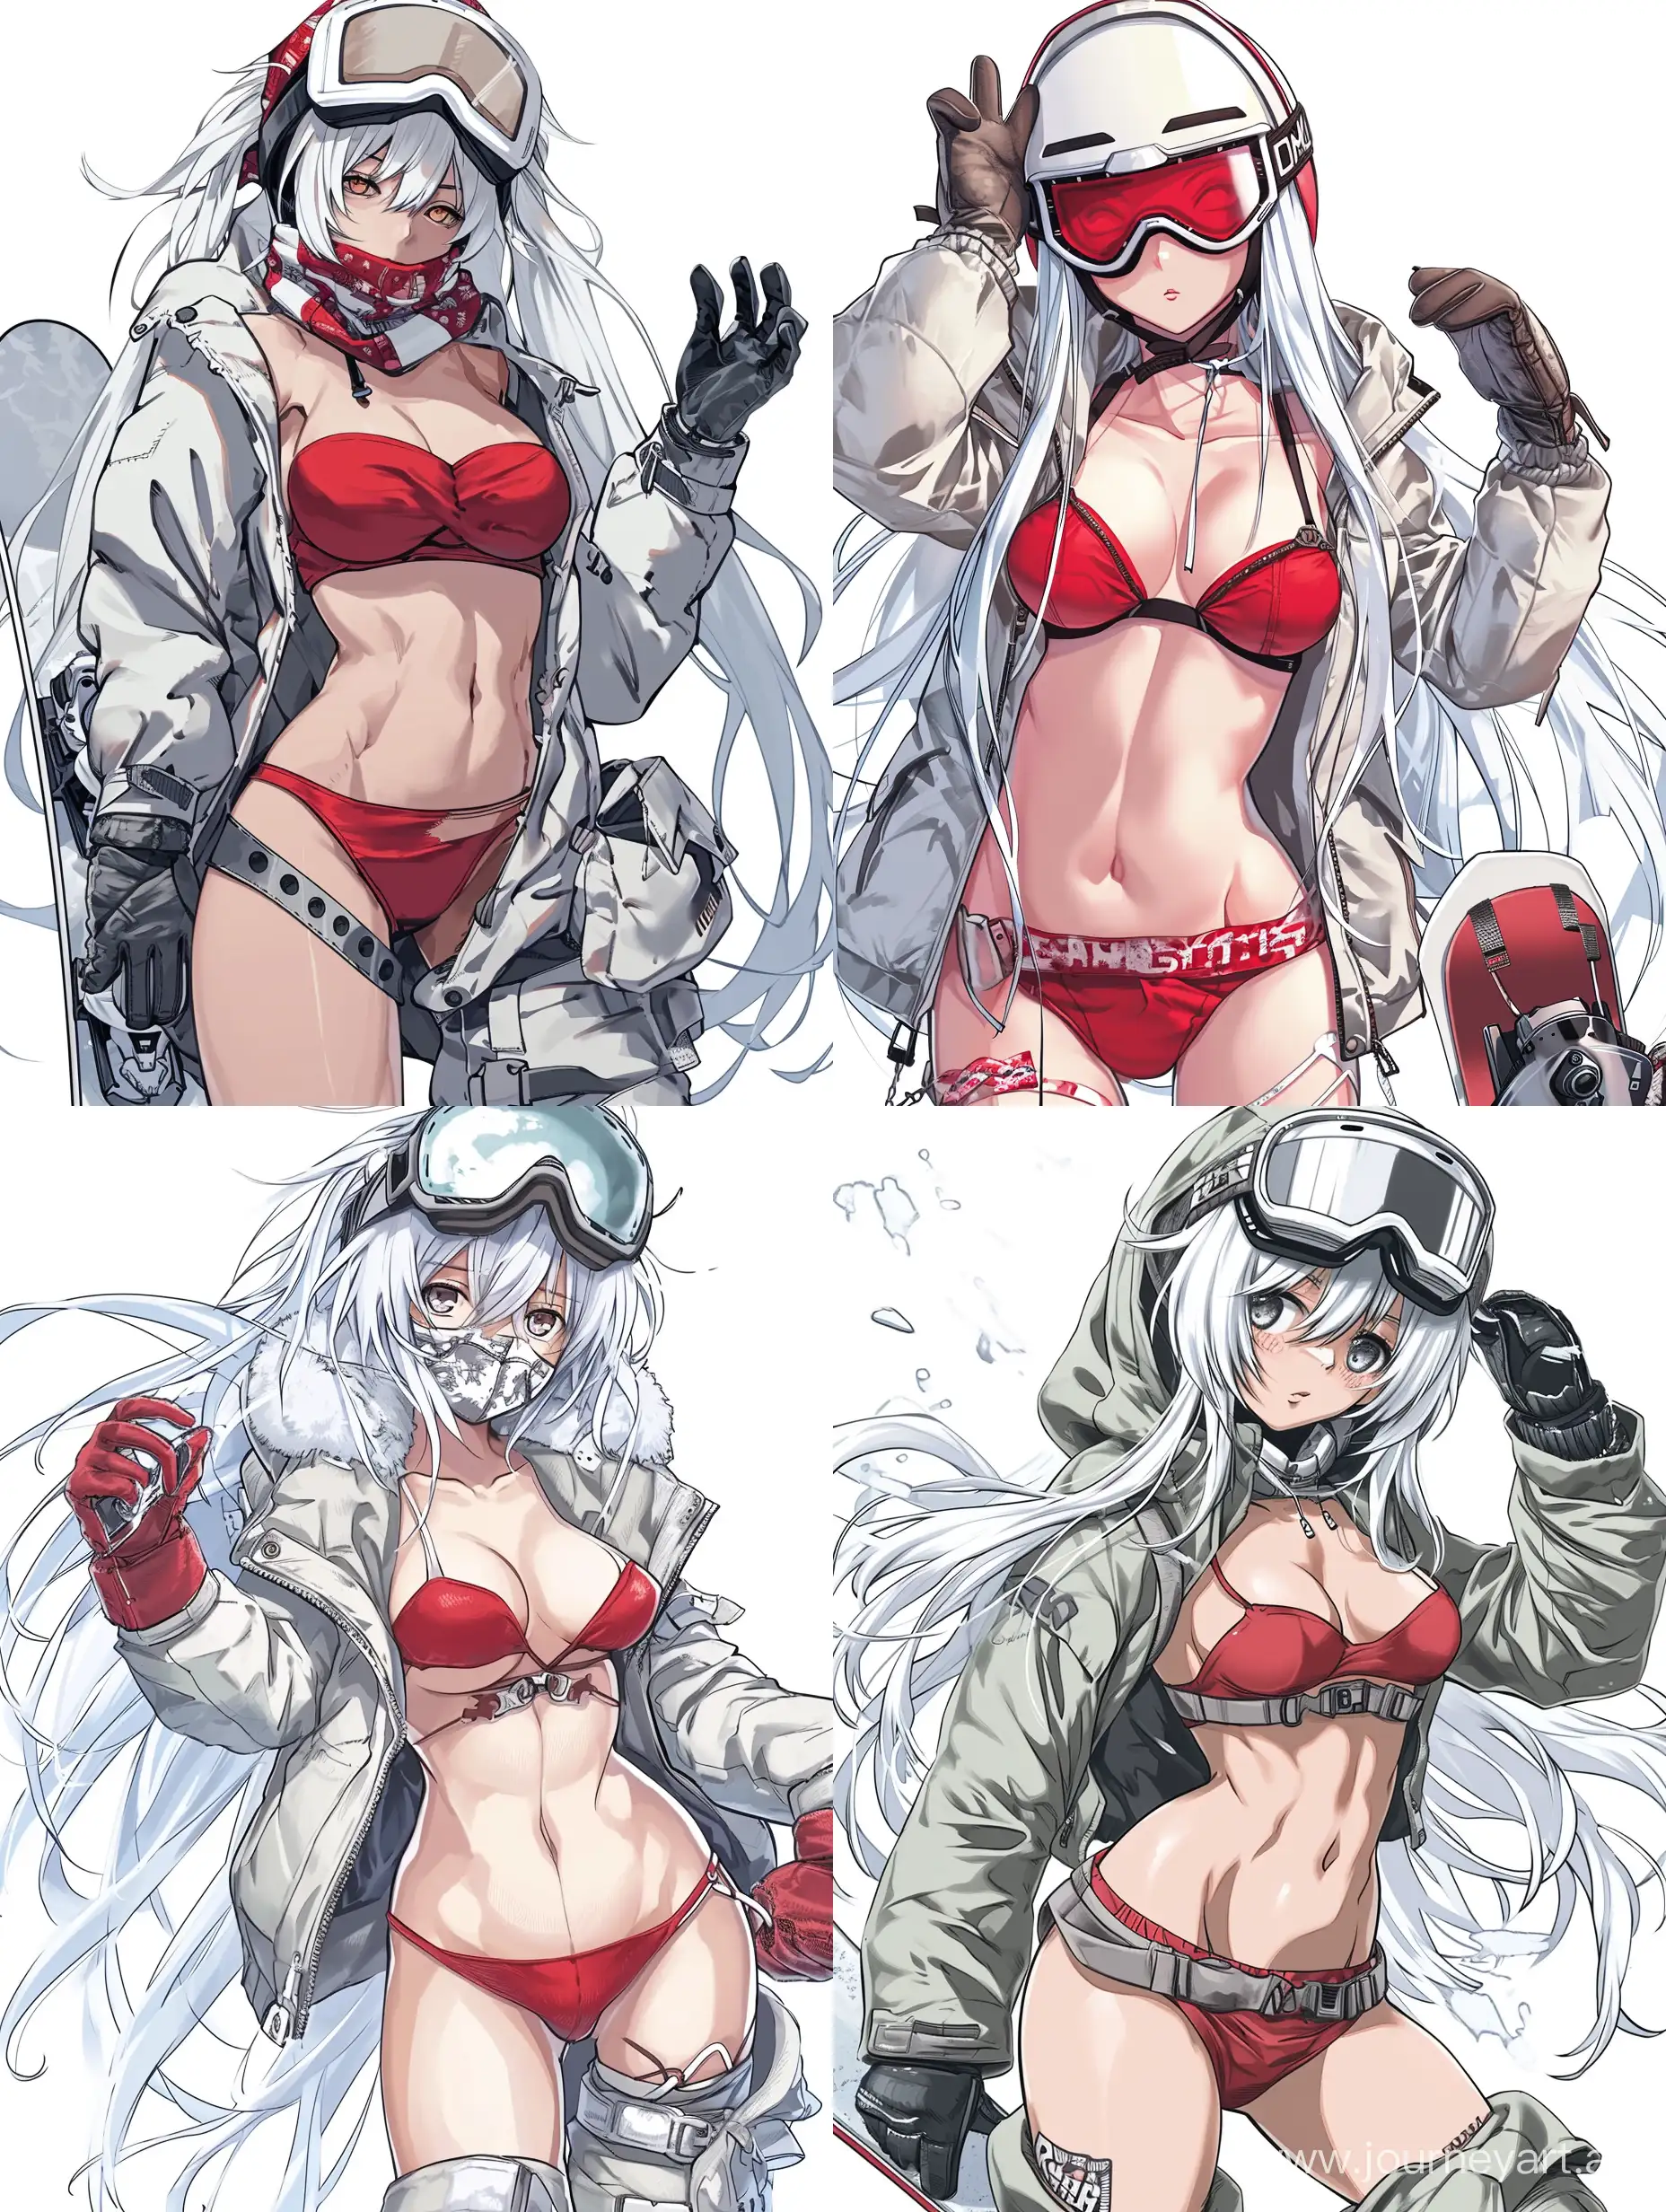 Beautiful-Manga-Character-in-Snowboarding-Gear-with-White-Hair